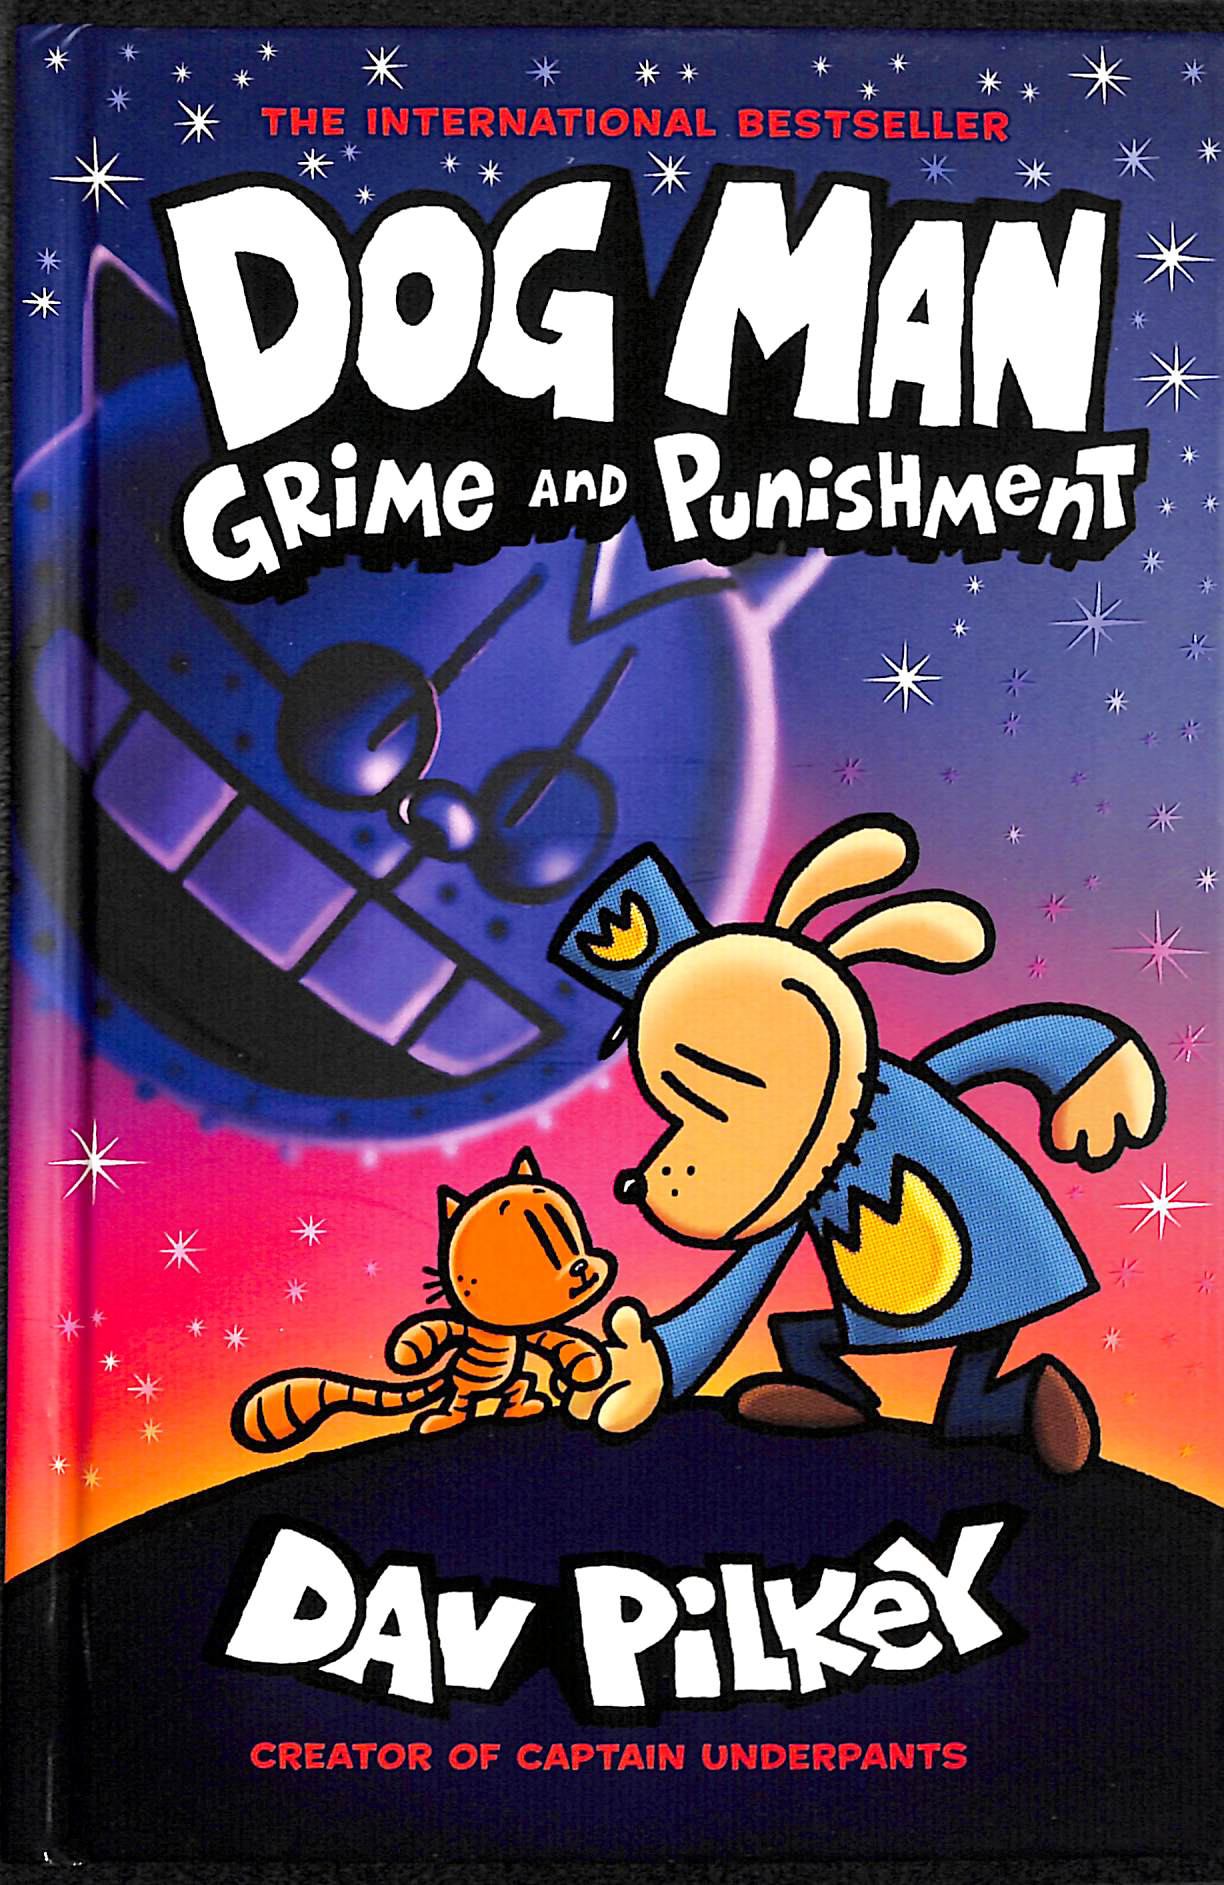 book cover image: Dog Man: Grime and Punishment